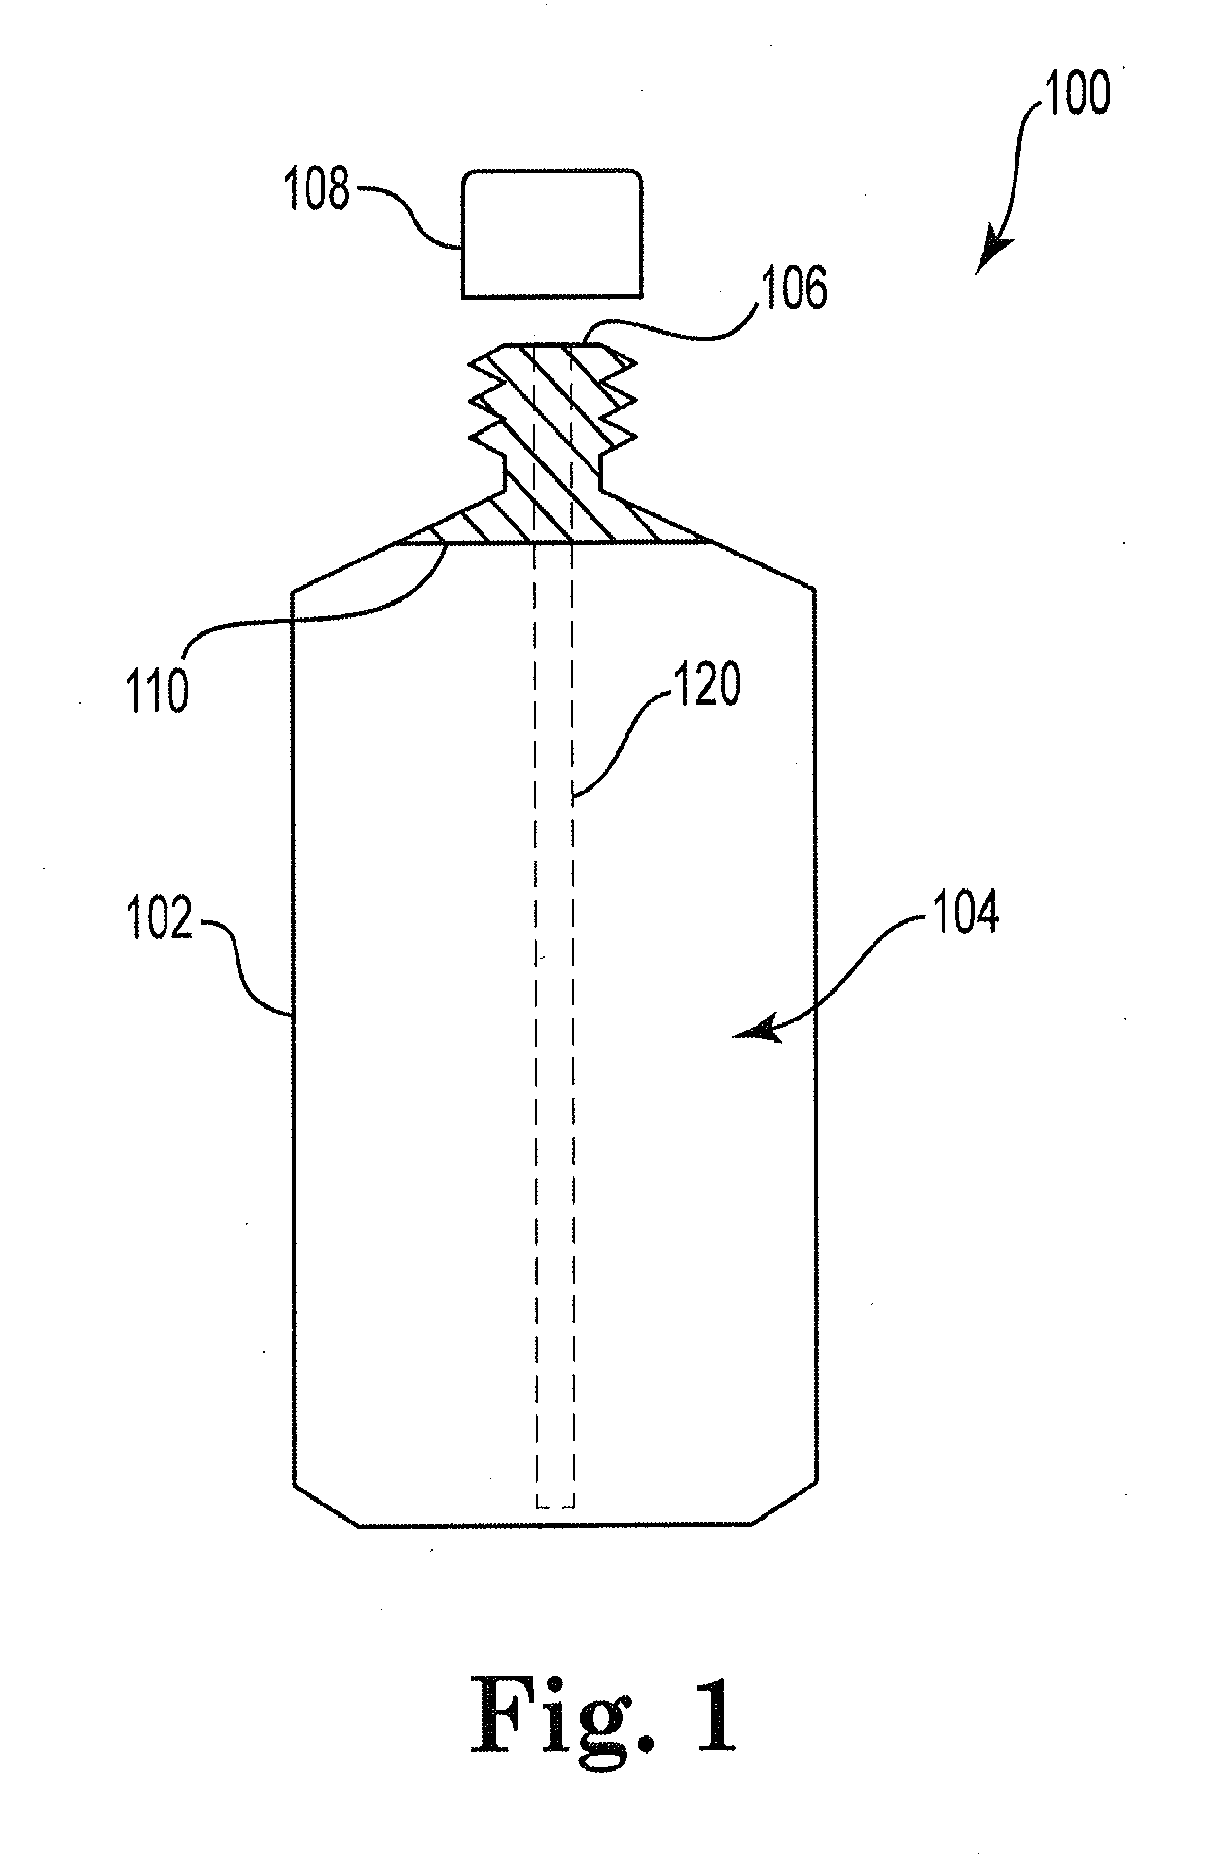 Substantially rigid collapsible liner, container and/or liner for replacing glass bottles, and enhanced flexible liners